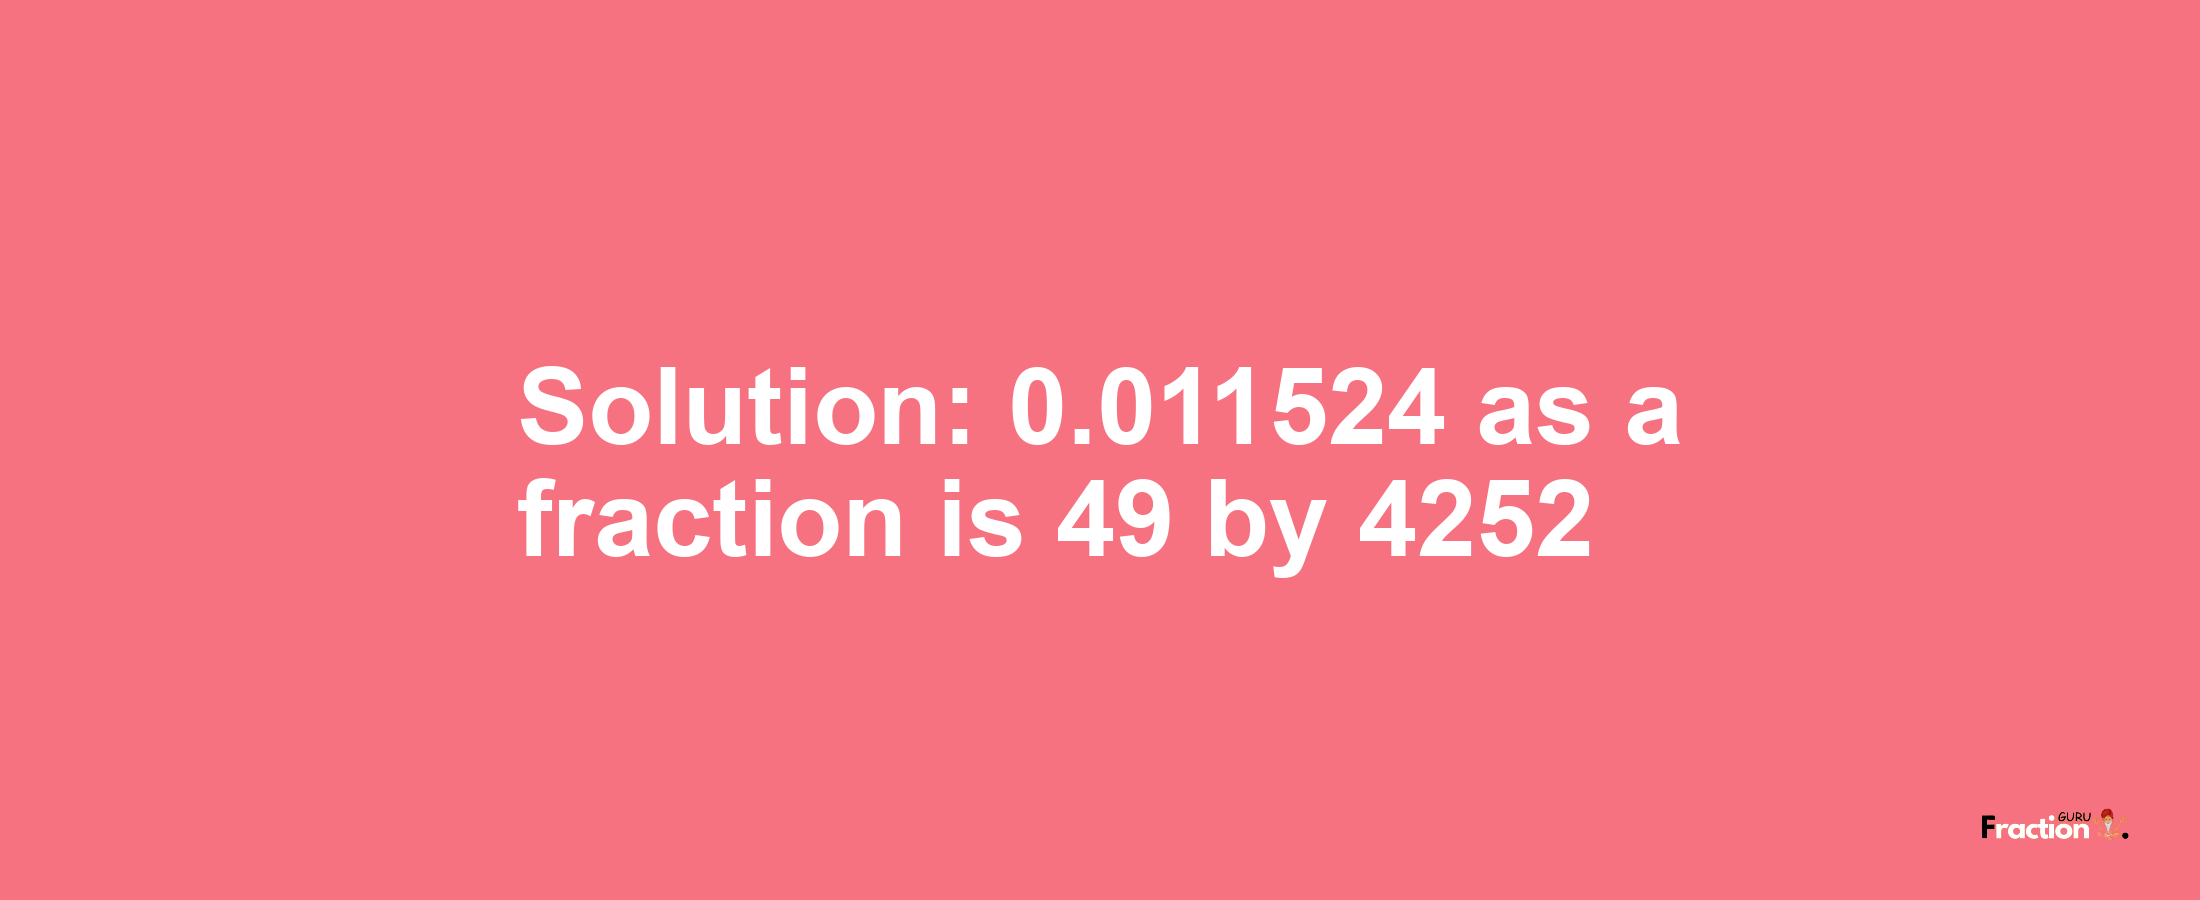 Solution:0.011524 as a fraction is 49/4252